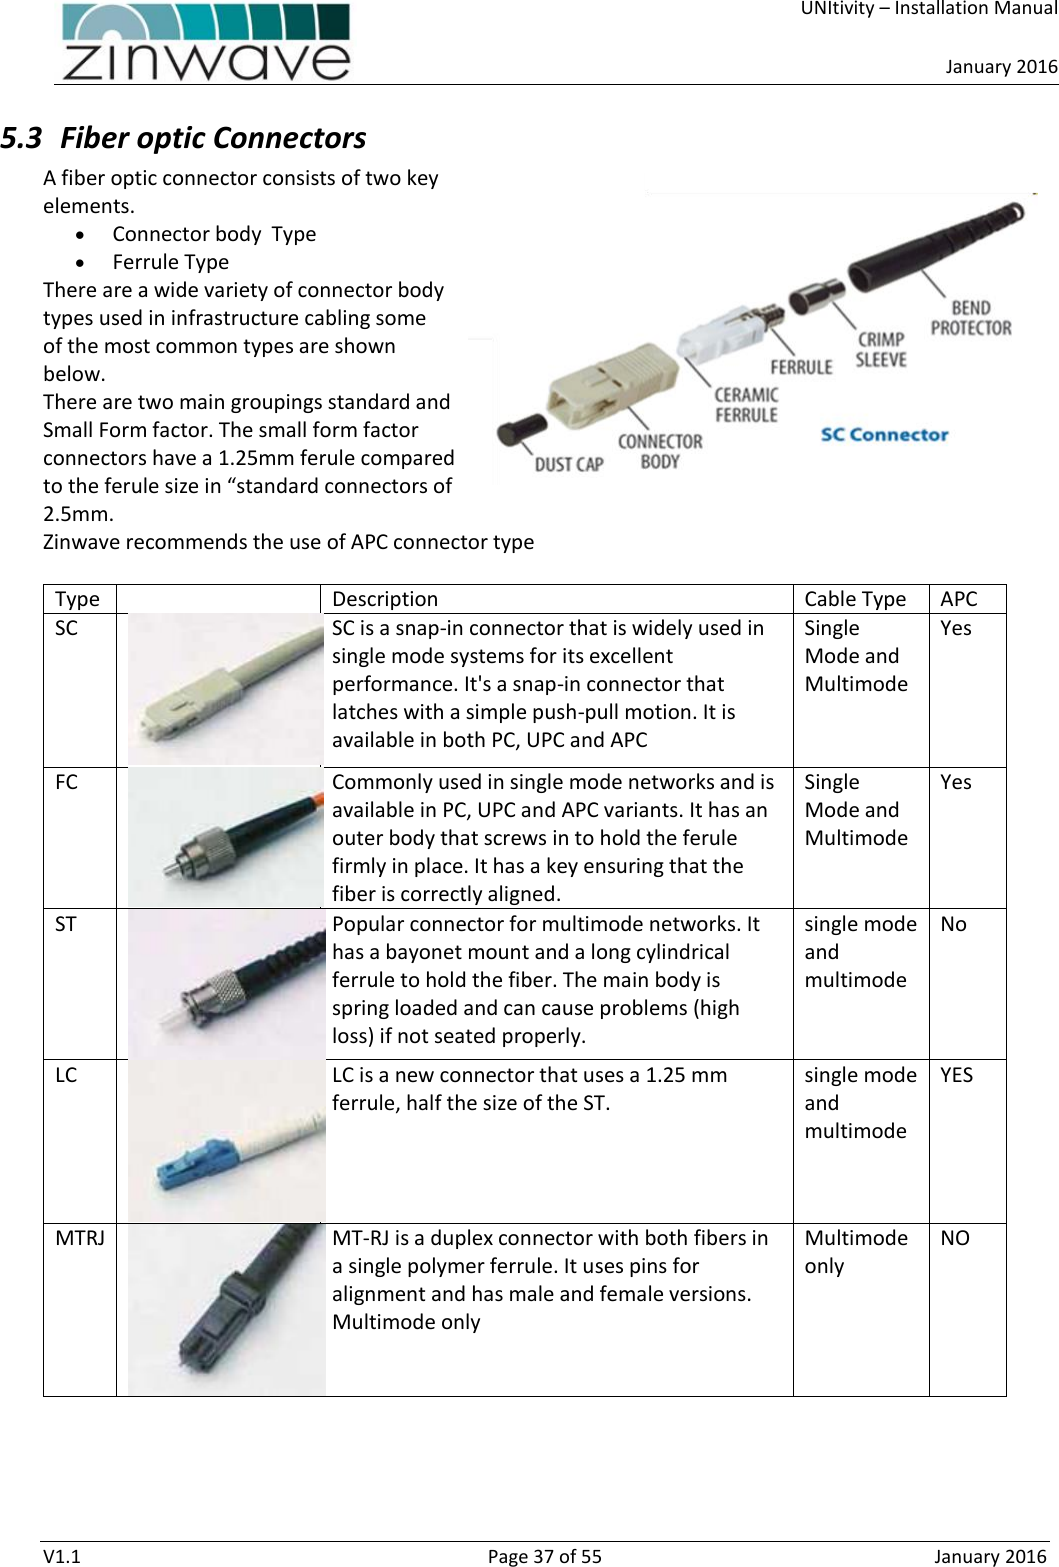     UNItivity – Installation Manual      January 2016  V1.1  Page 37 of 55  January 2016 5.3 Fiber optic Connectors A fiber optic connector consists of two key elements.   Connector body  Type   Ferrule Type There are a wide variety of connector body types used in infrastructure cabling some of the most common types are shown below. There are two main groupings standard and Small Form factor. The small form factor connectors have a 1.25mm ferule compared to the ferule size in “standard connectors of 2.5mm. Zinwave recommends the use of APC connector type  Type  Description Cable Type APC  SC  SC is a snap-in connector that is widely used in single mode systems for its excellent performance. It&apos;s a snap-in connector that latches with a simple push-pull motion. It is available in both PC, UPC and APC Single Mode and Multimode Yes FC  Commonly used in single mode networks and is available in PC, UPC and APC variants. It has an outer body that screws in to hold the ferule firmly in place. It has a key ensuring that the fiber is correctly aligned. Single Mode and Multimode Yes ST  Popular connector for multimode networks. It has a bayonet mount and a long cylindrical ferrule to hold the fiber. The main body is spring loaded and can cause problems (high loss) if not seated properly. single mode and multimode No LC  LC is a new connector that uses a 1.25 mm ferrule, half the size of the ST.  single mode and multimode YES MTRJ  MT-RJ is a duplex connector with both fibers in a single polymer ferrule. It uses pins for alignment and has male and female versions. Multimode only Multimode only NO  